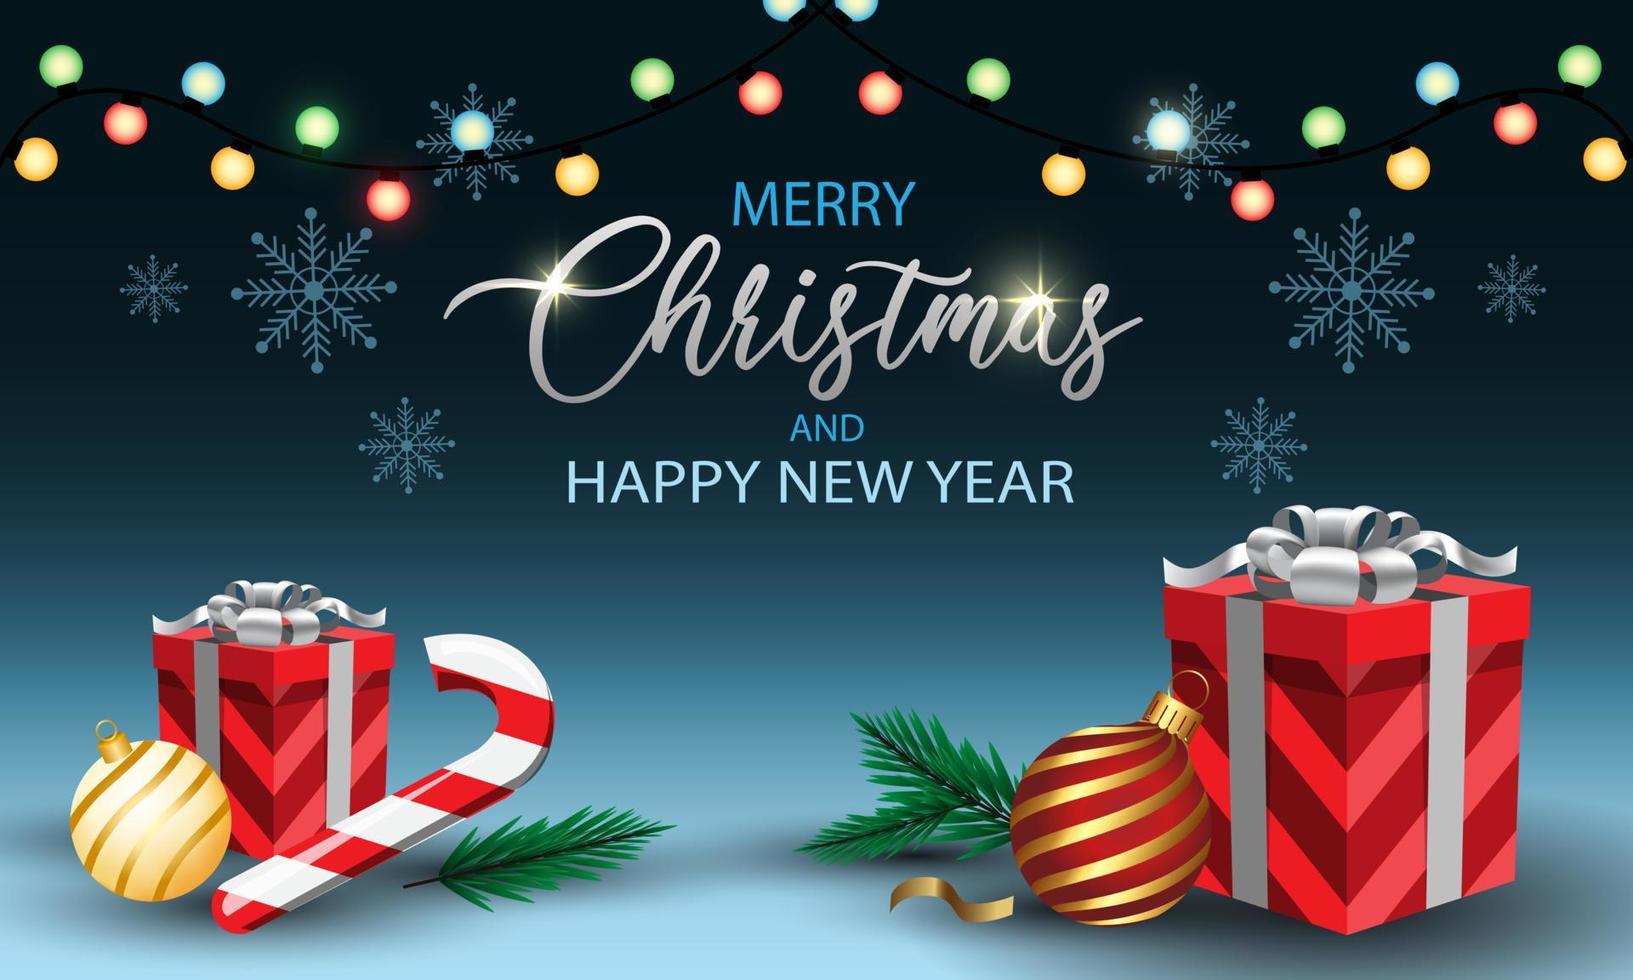 Merry Christmas and Happy New Year Gift box on blue with text design for holiday festival celebration vector background